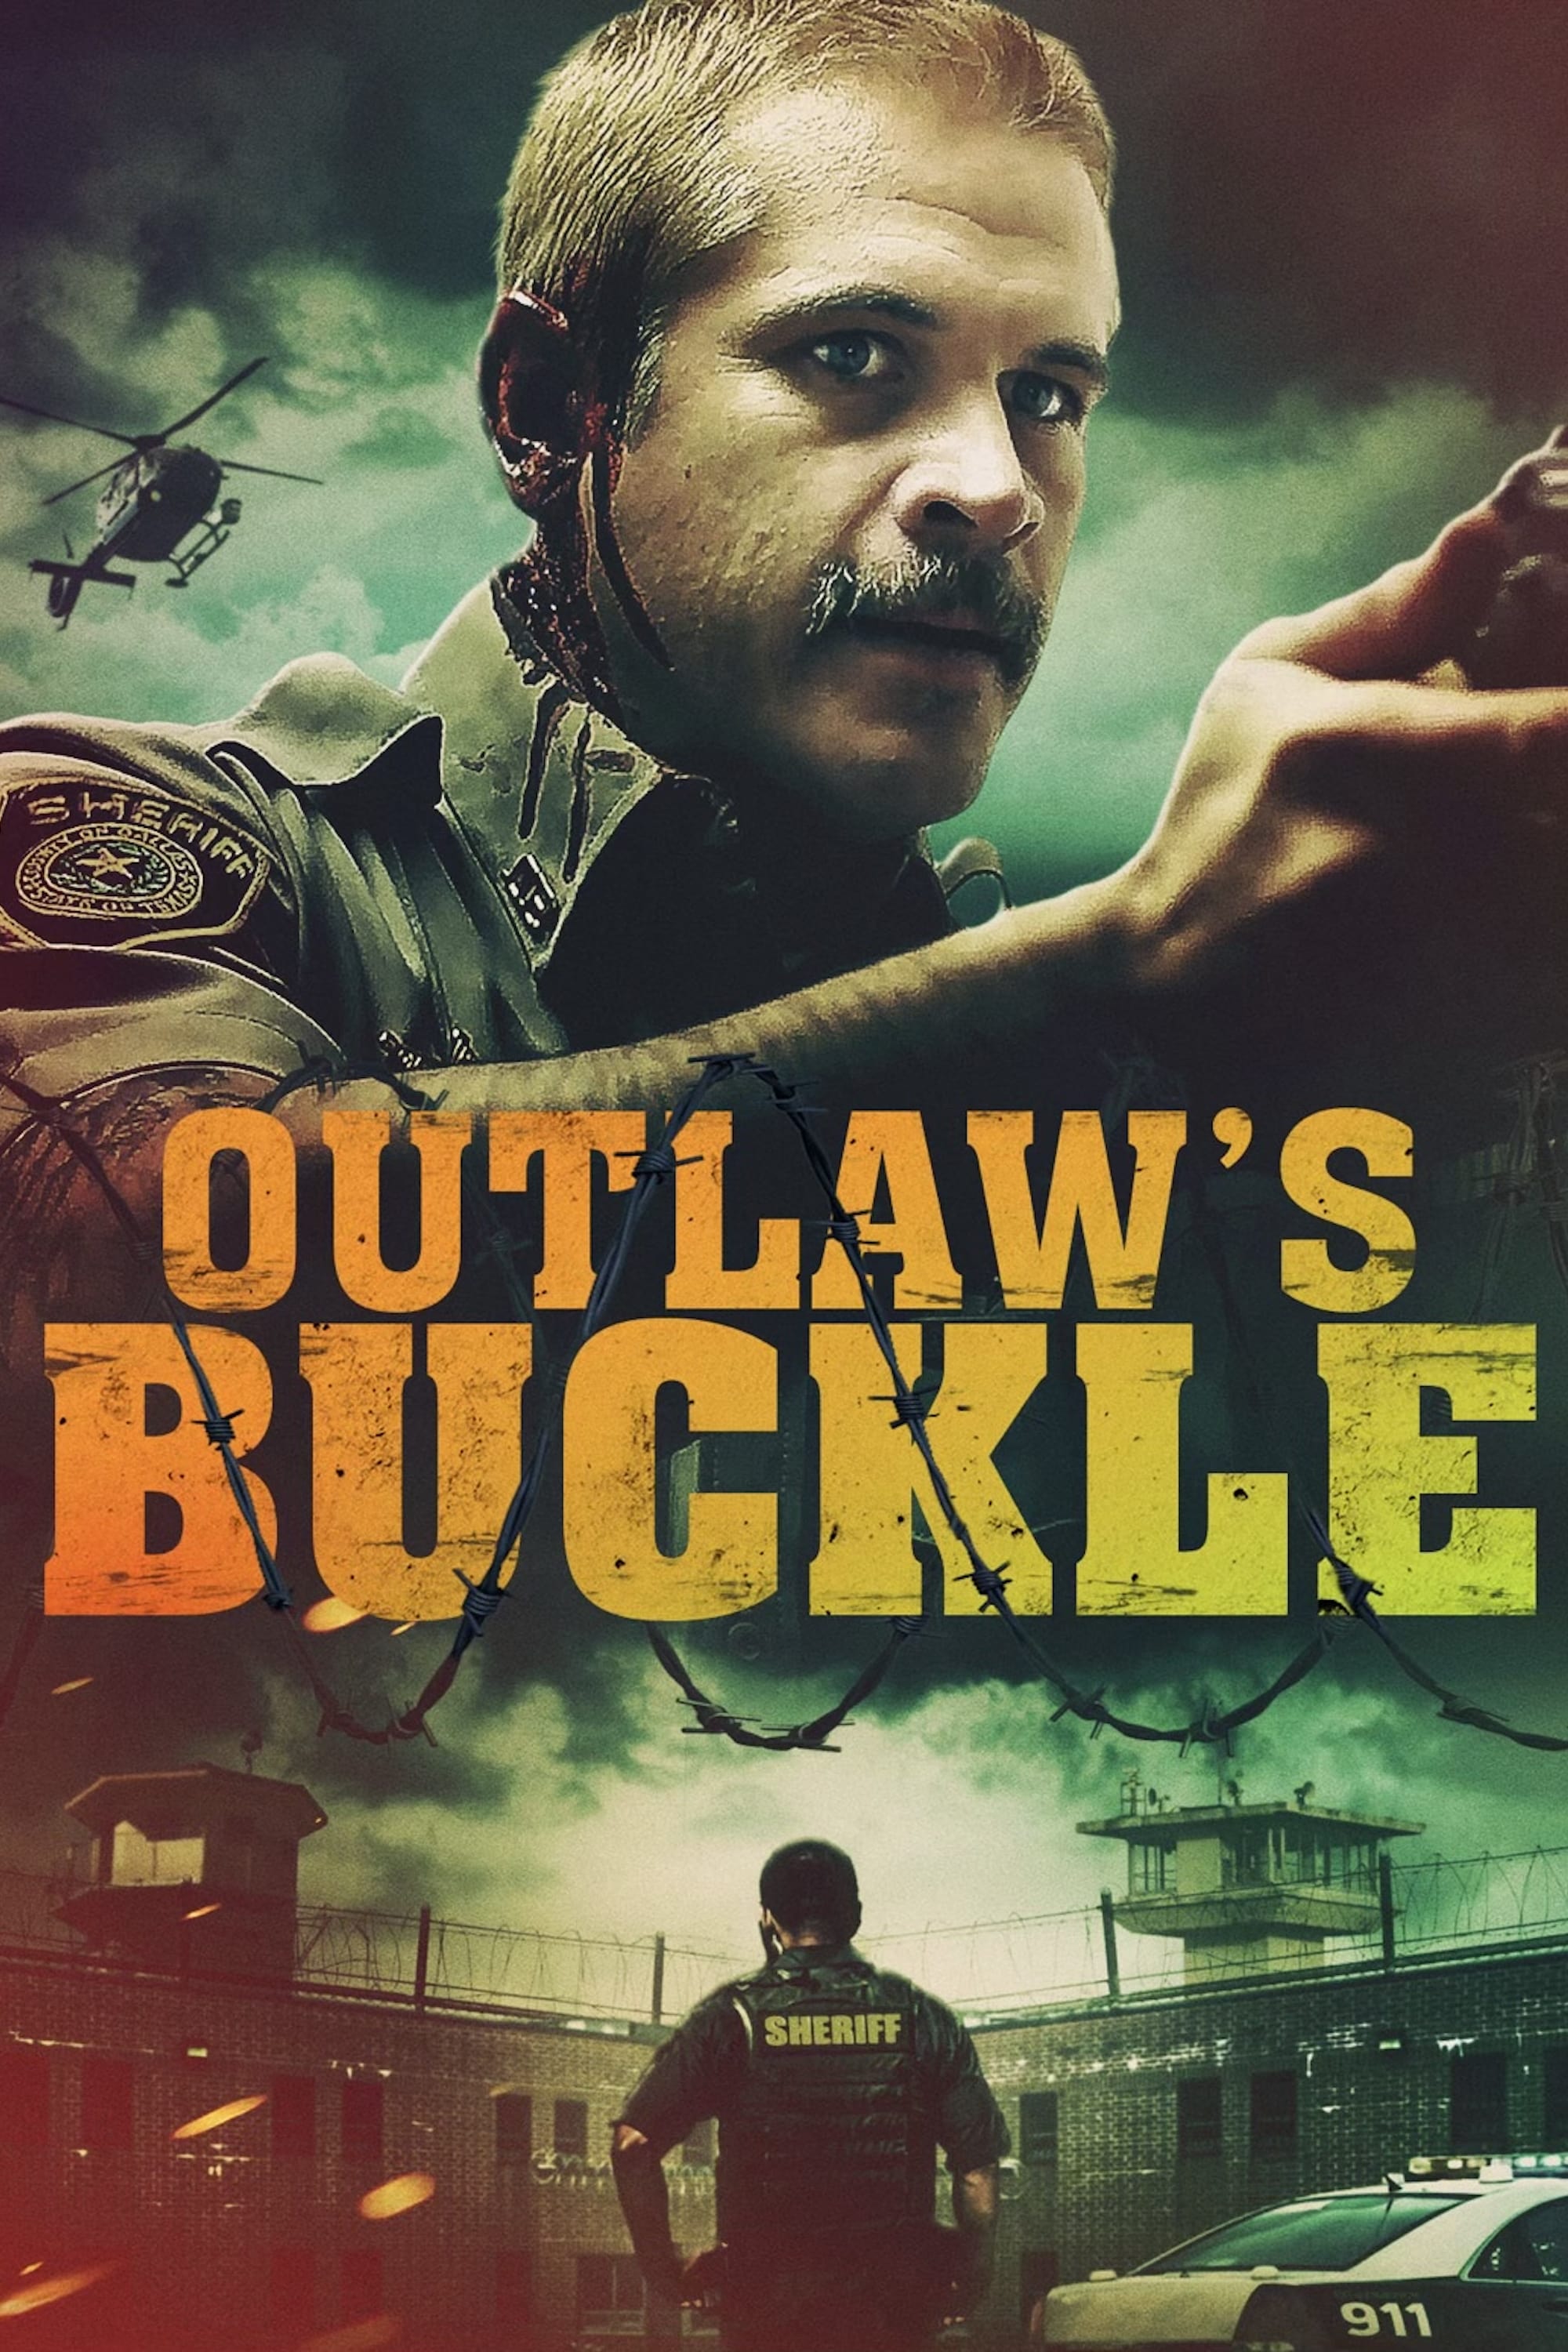 Outlaw's Buckle film